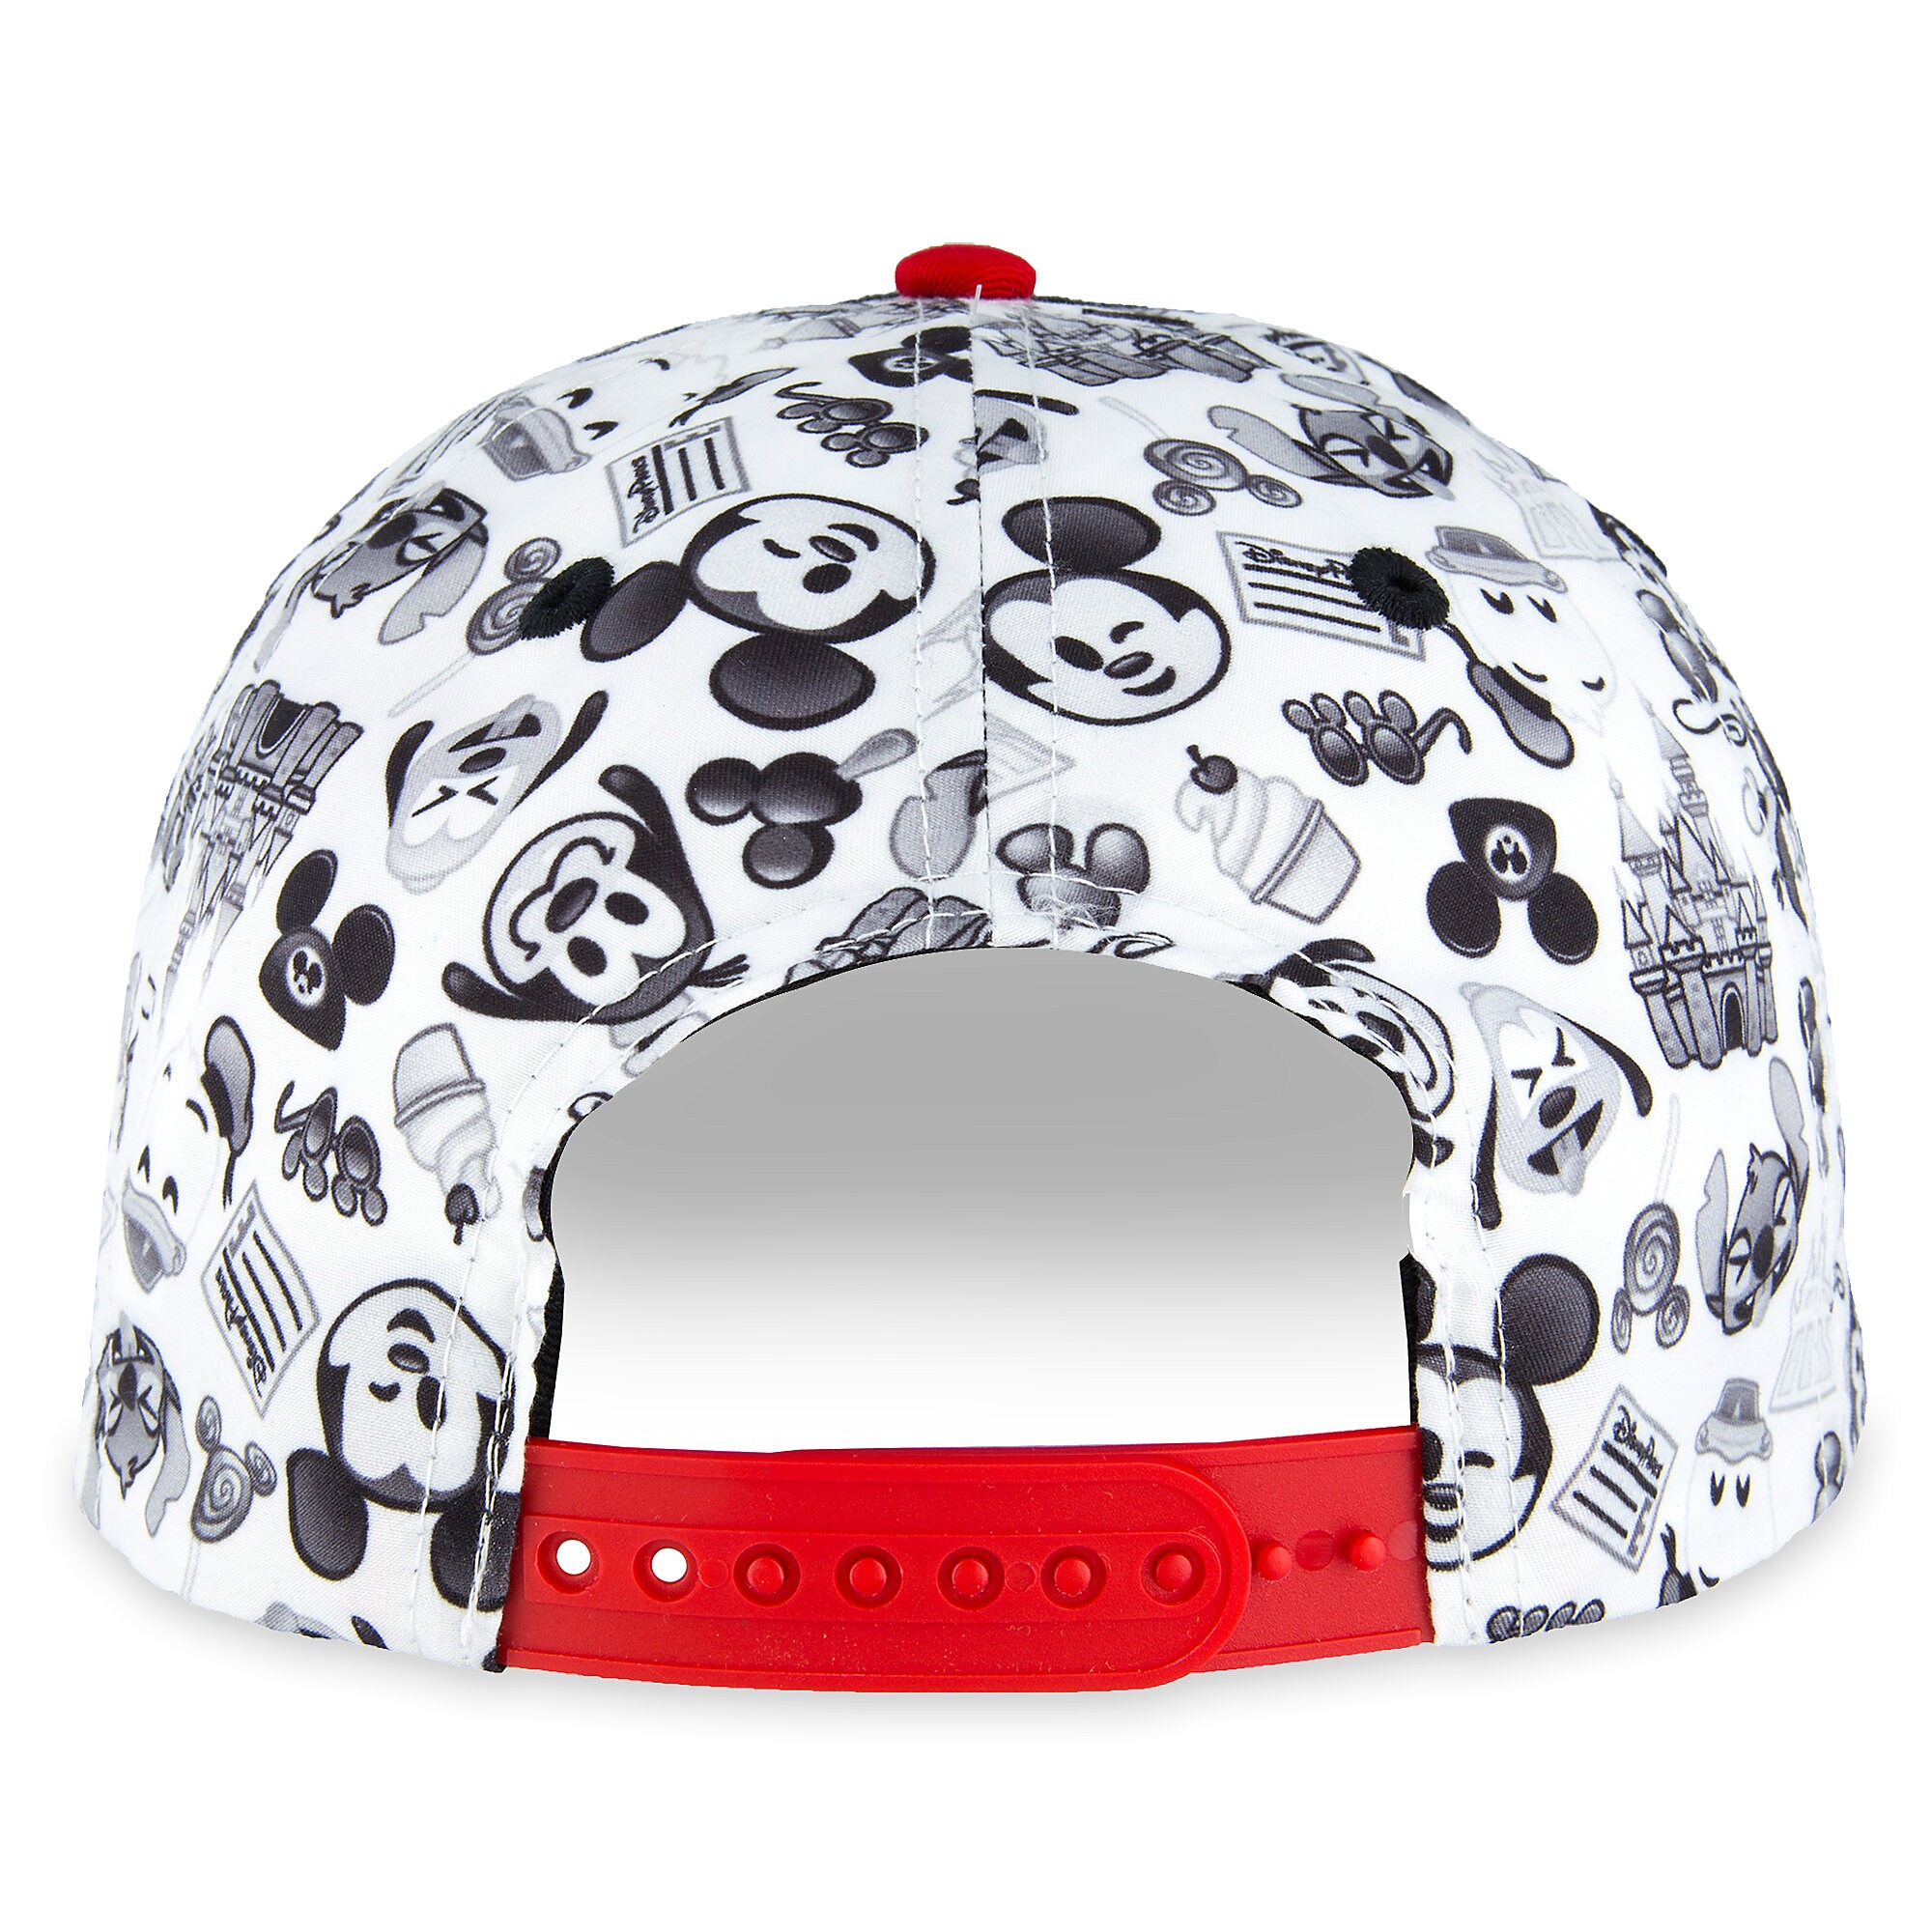 Disney Parks Emoji Baseball Cap with Patches for Adults